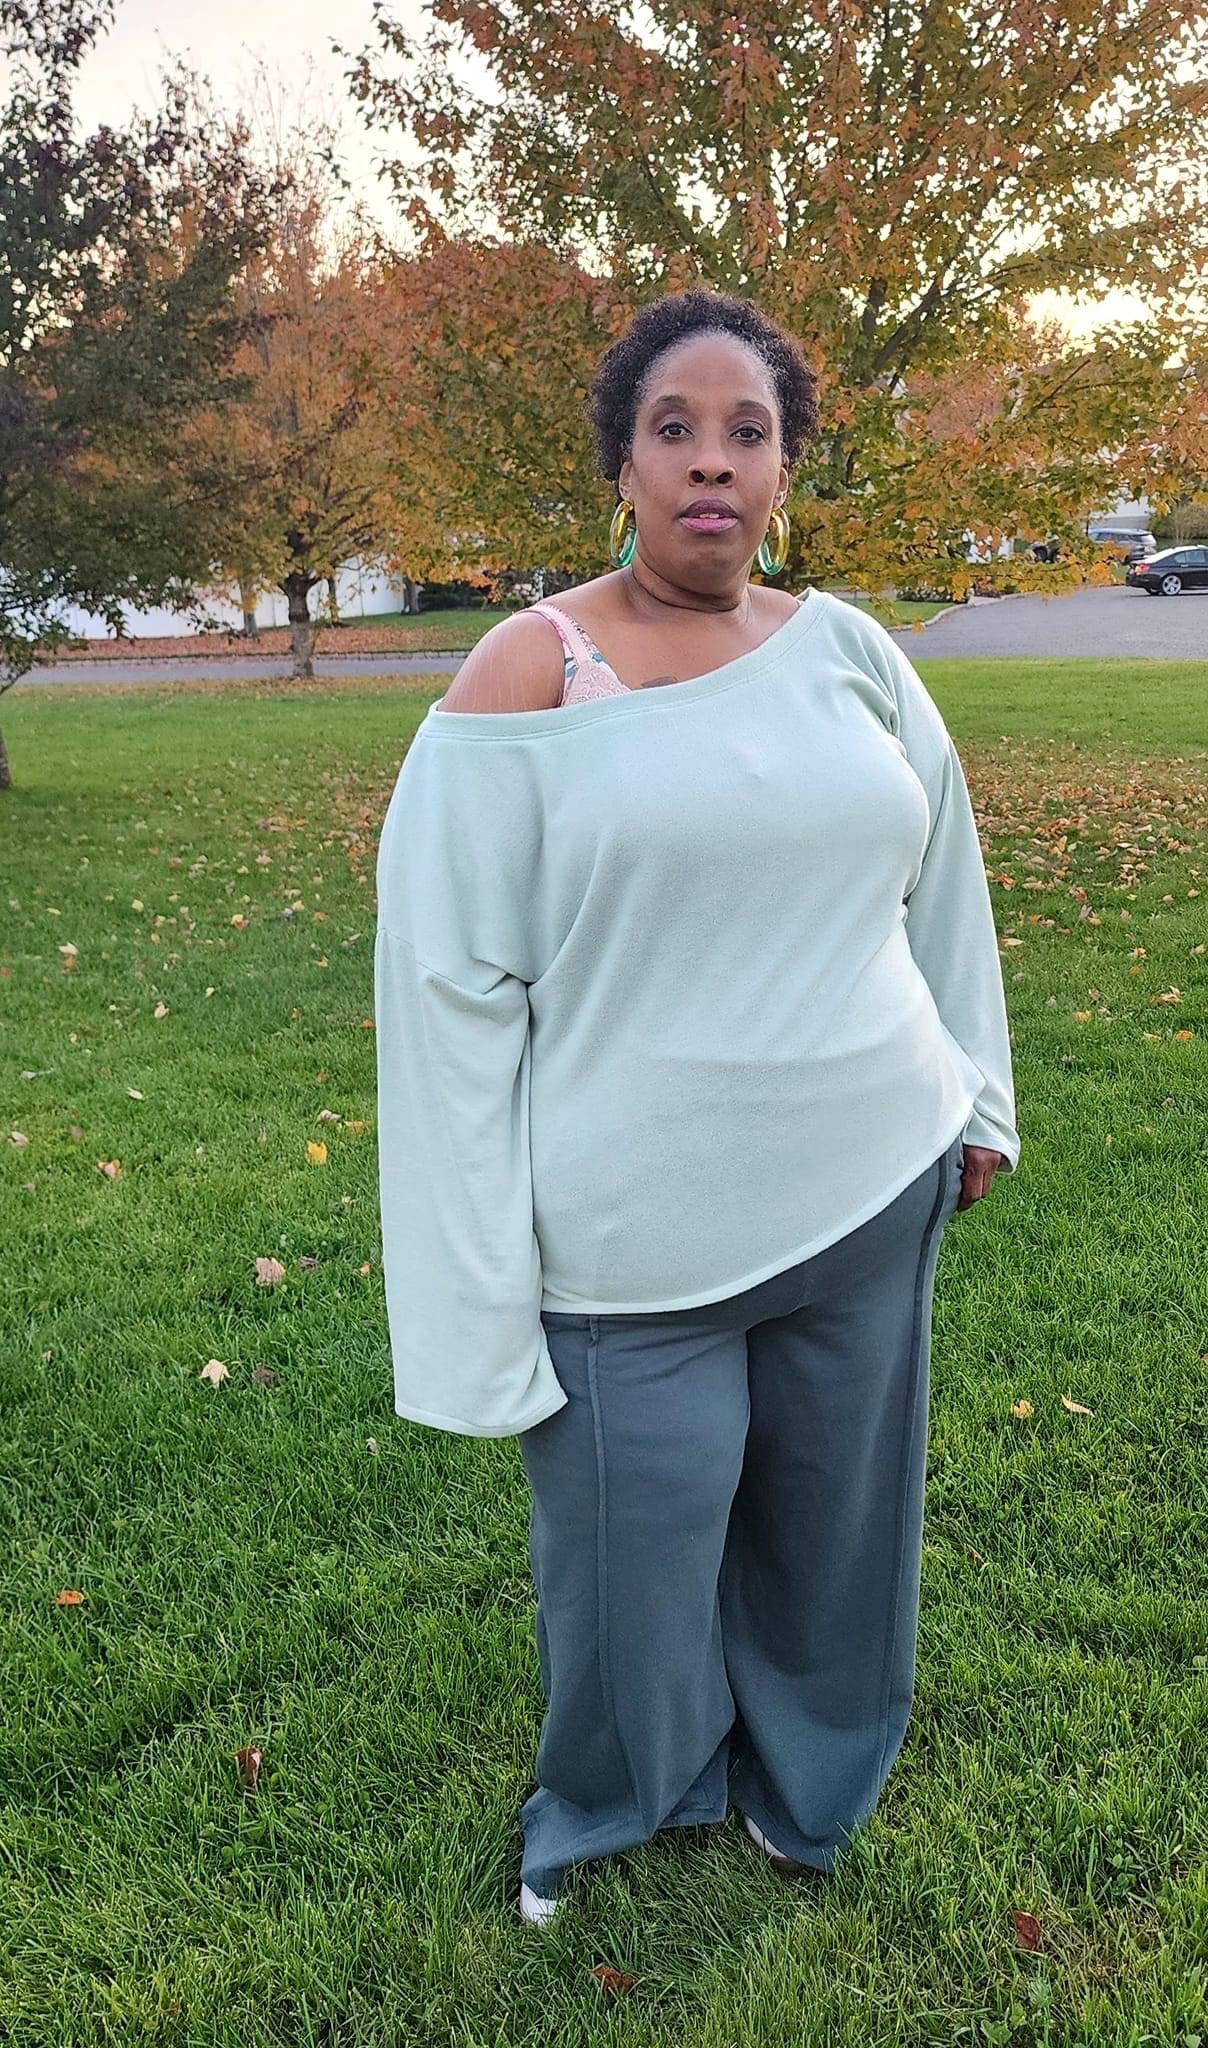 Willow Green, Brushed Solid Sweater Knit - Boho Fabrics